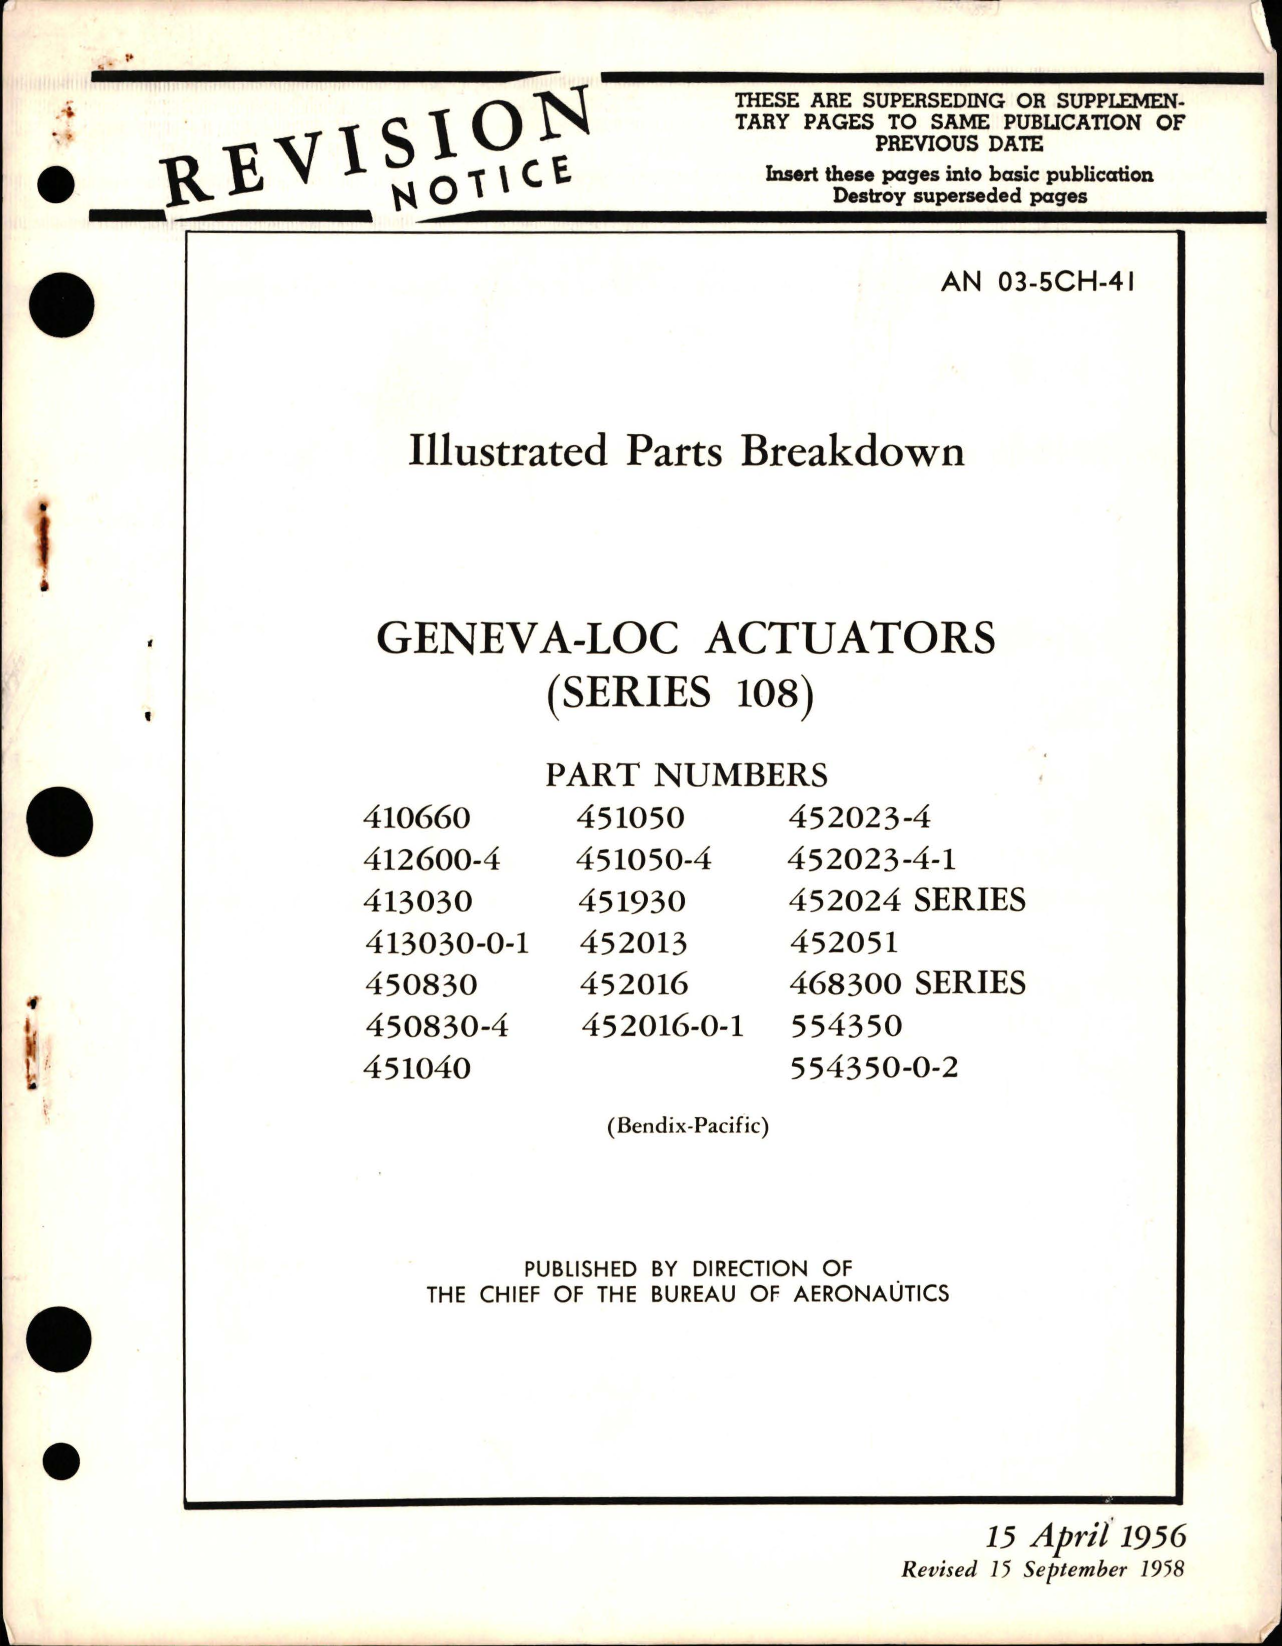 Sample page 1 from AirCorps Library document: Illustrated Parts Breakdown for Geneva-Loc Actuators - Series 108